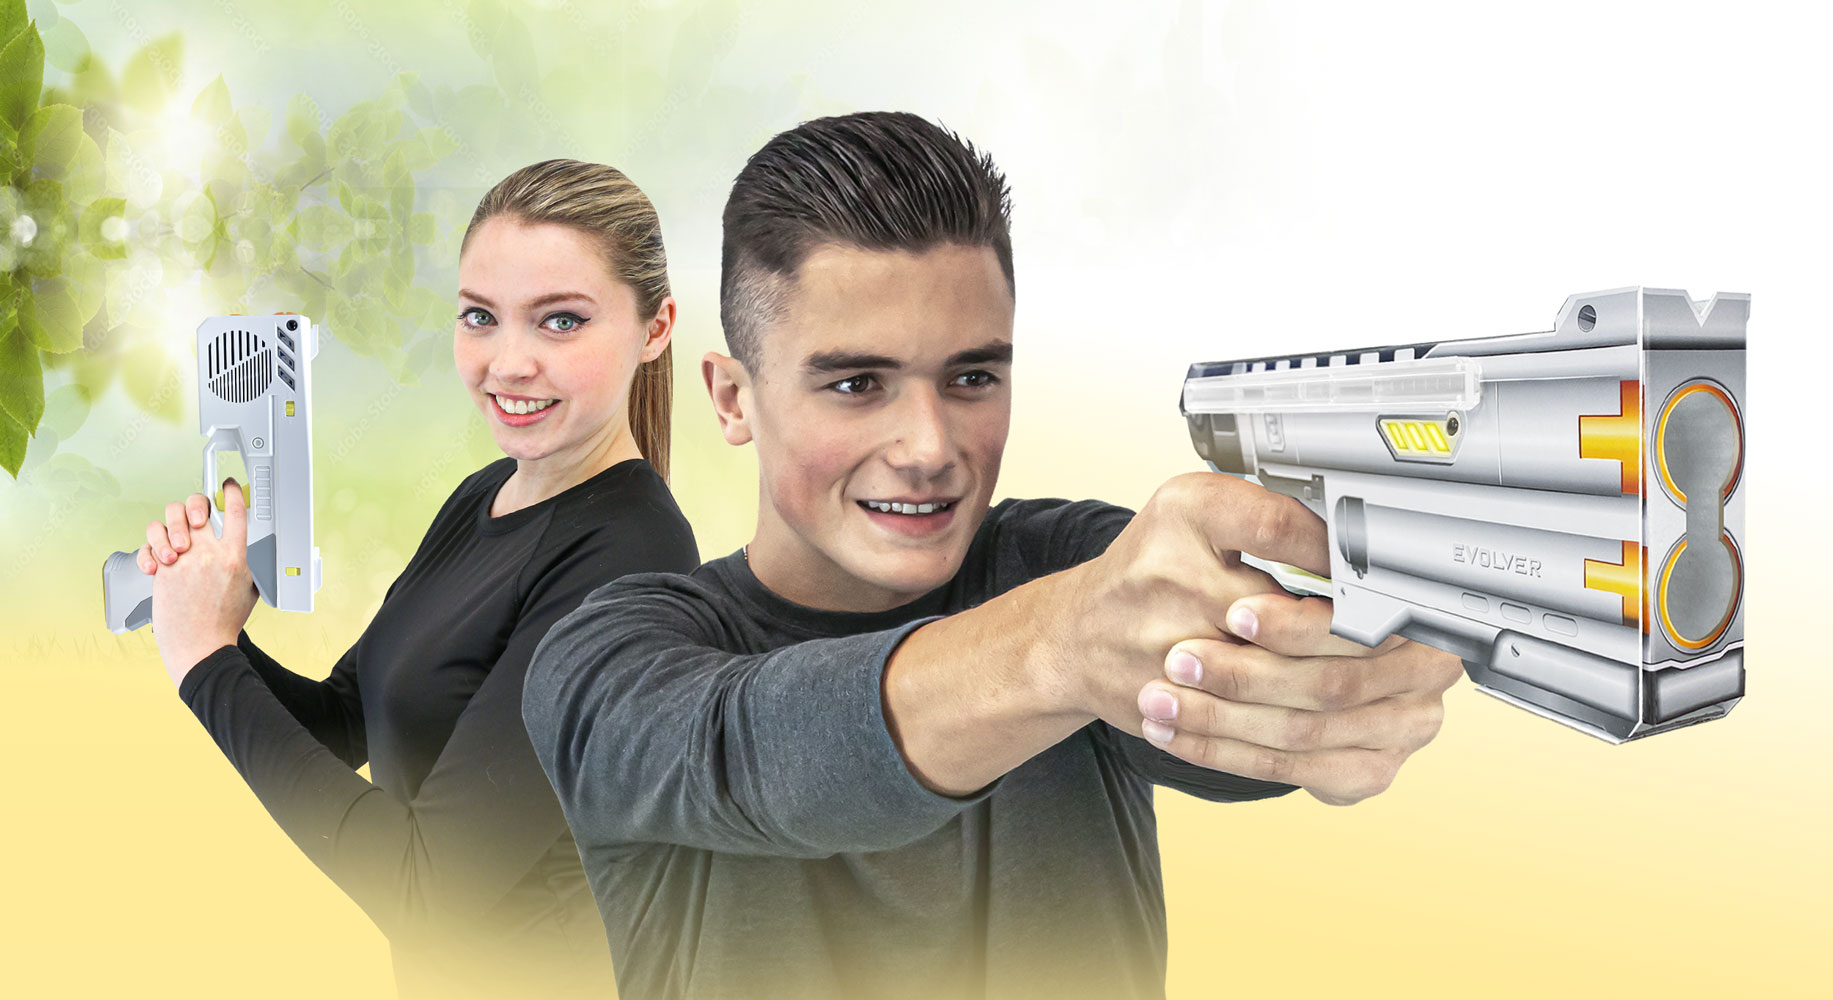 5 REASONS WHY THE EVOLVER IS THE BEST HOME LASER TAG